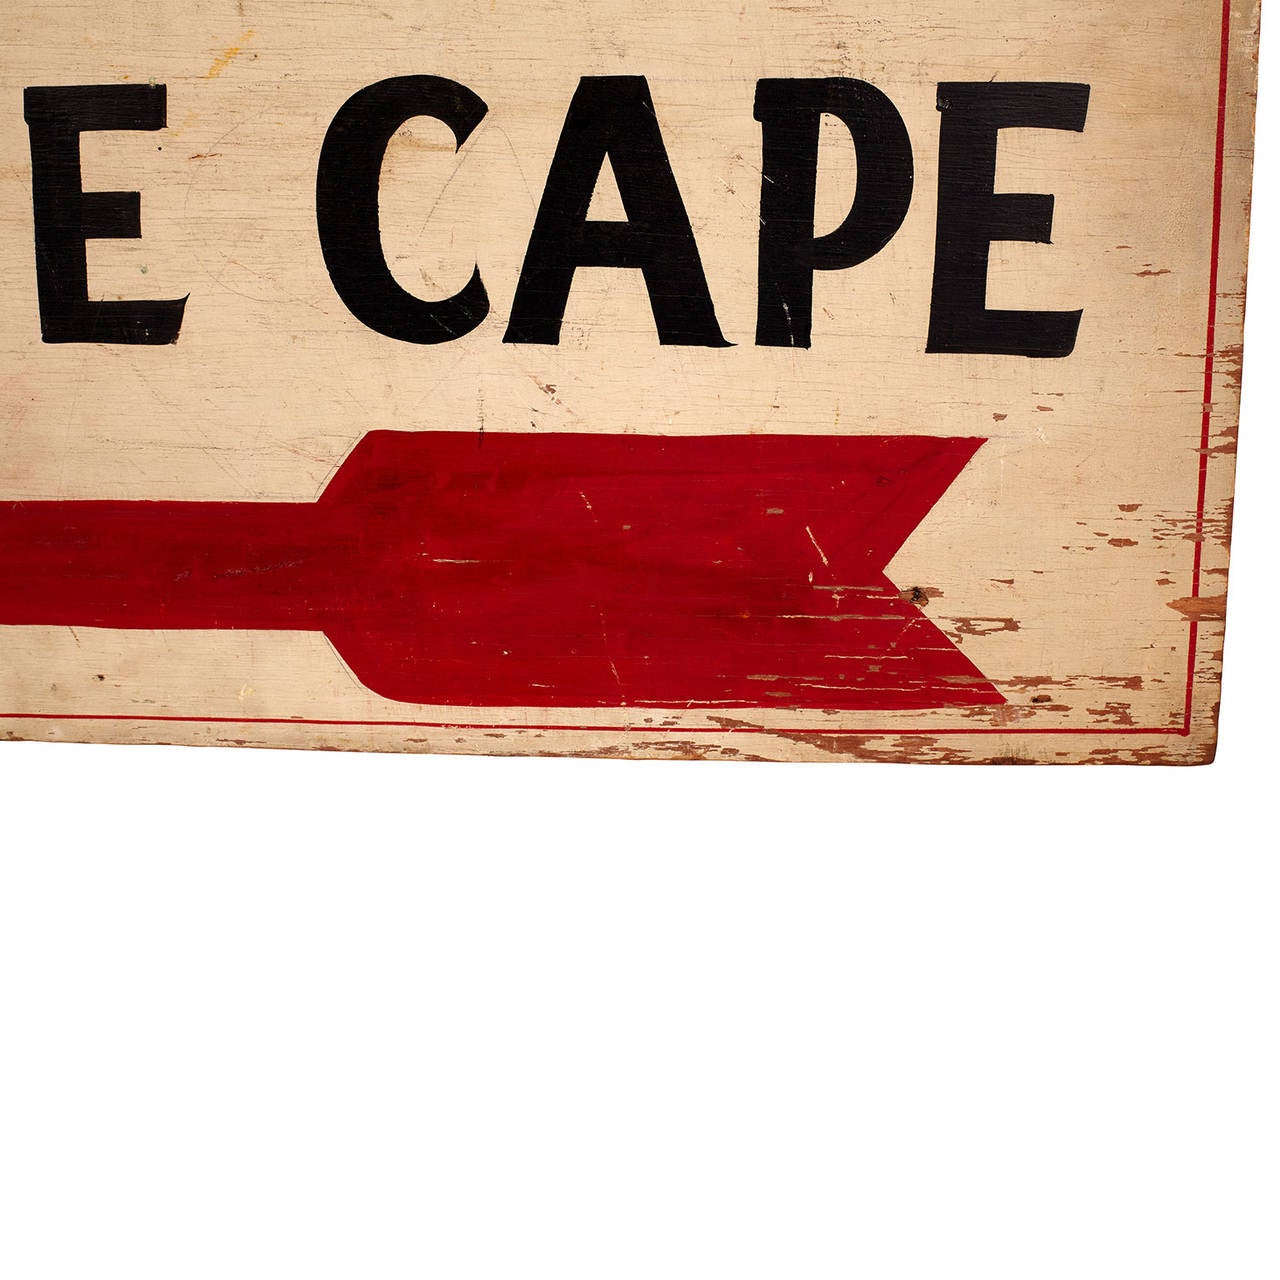 A detour sign from Cape Cod in original paint on wood from the 1950s.